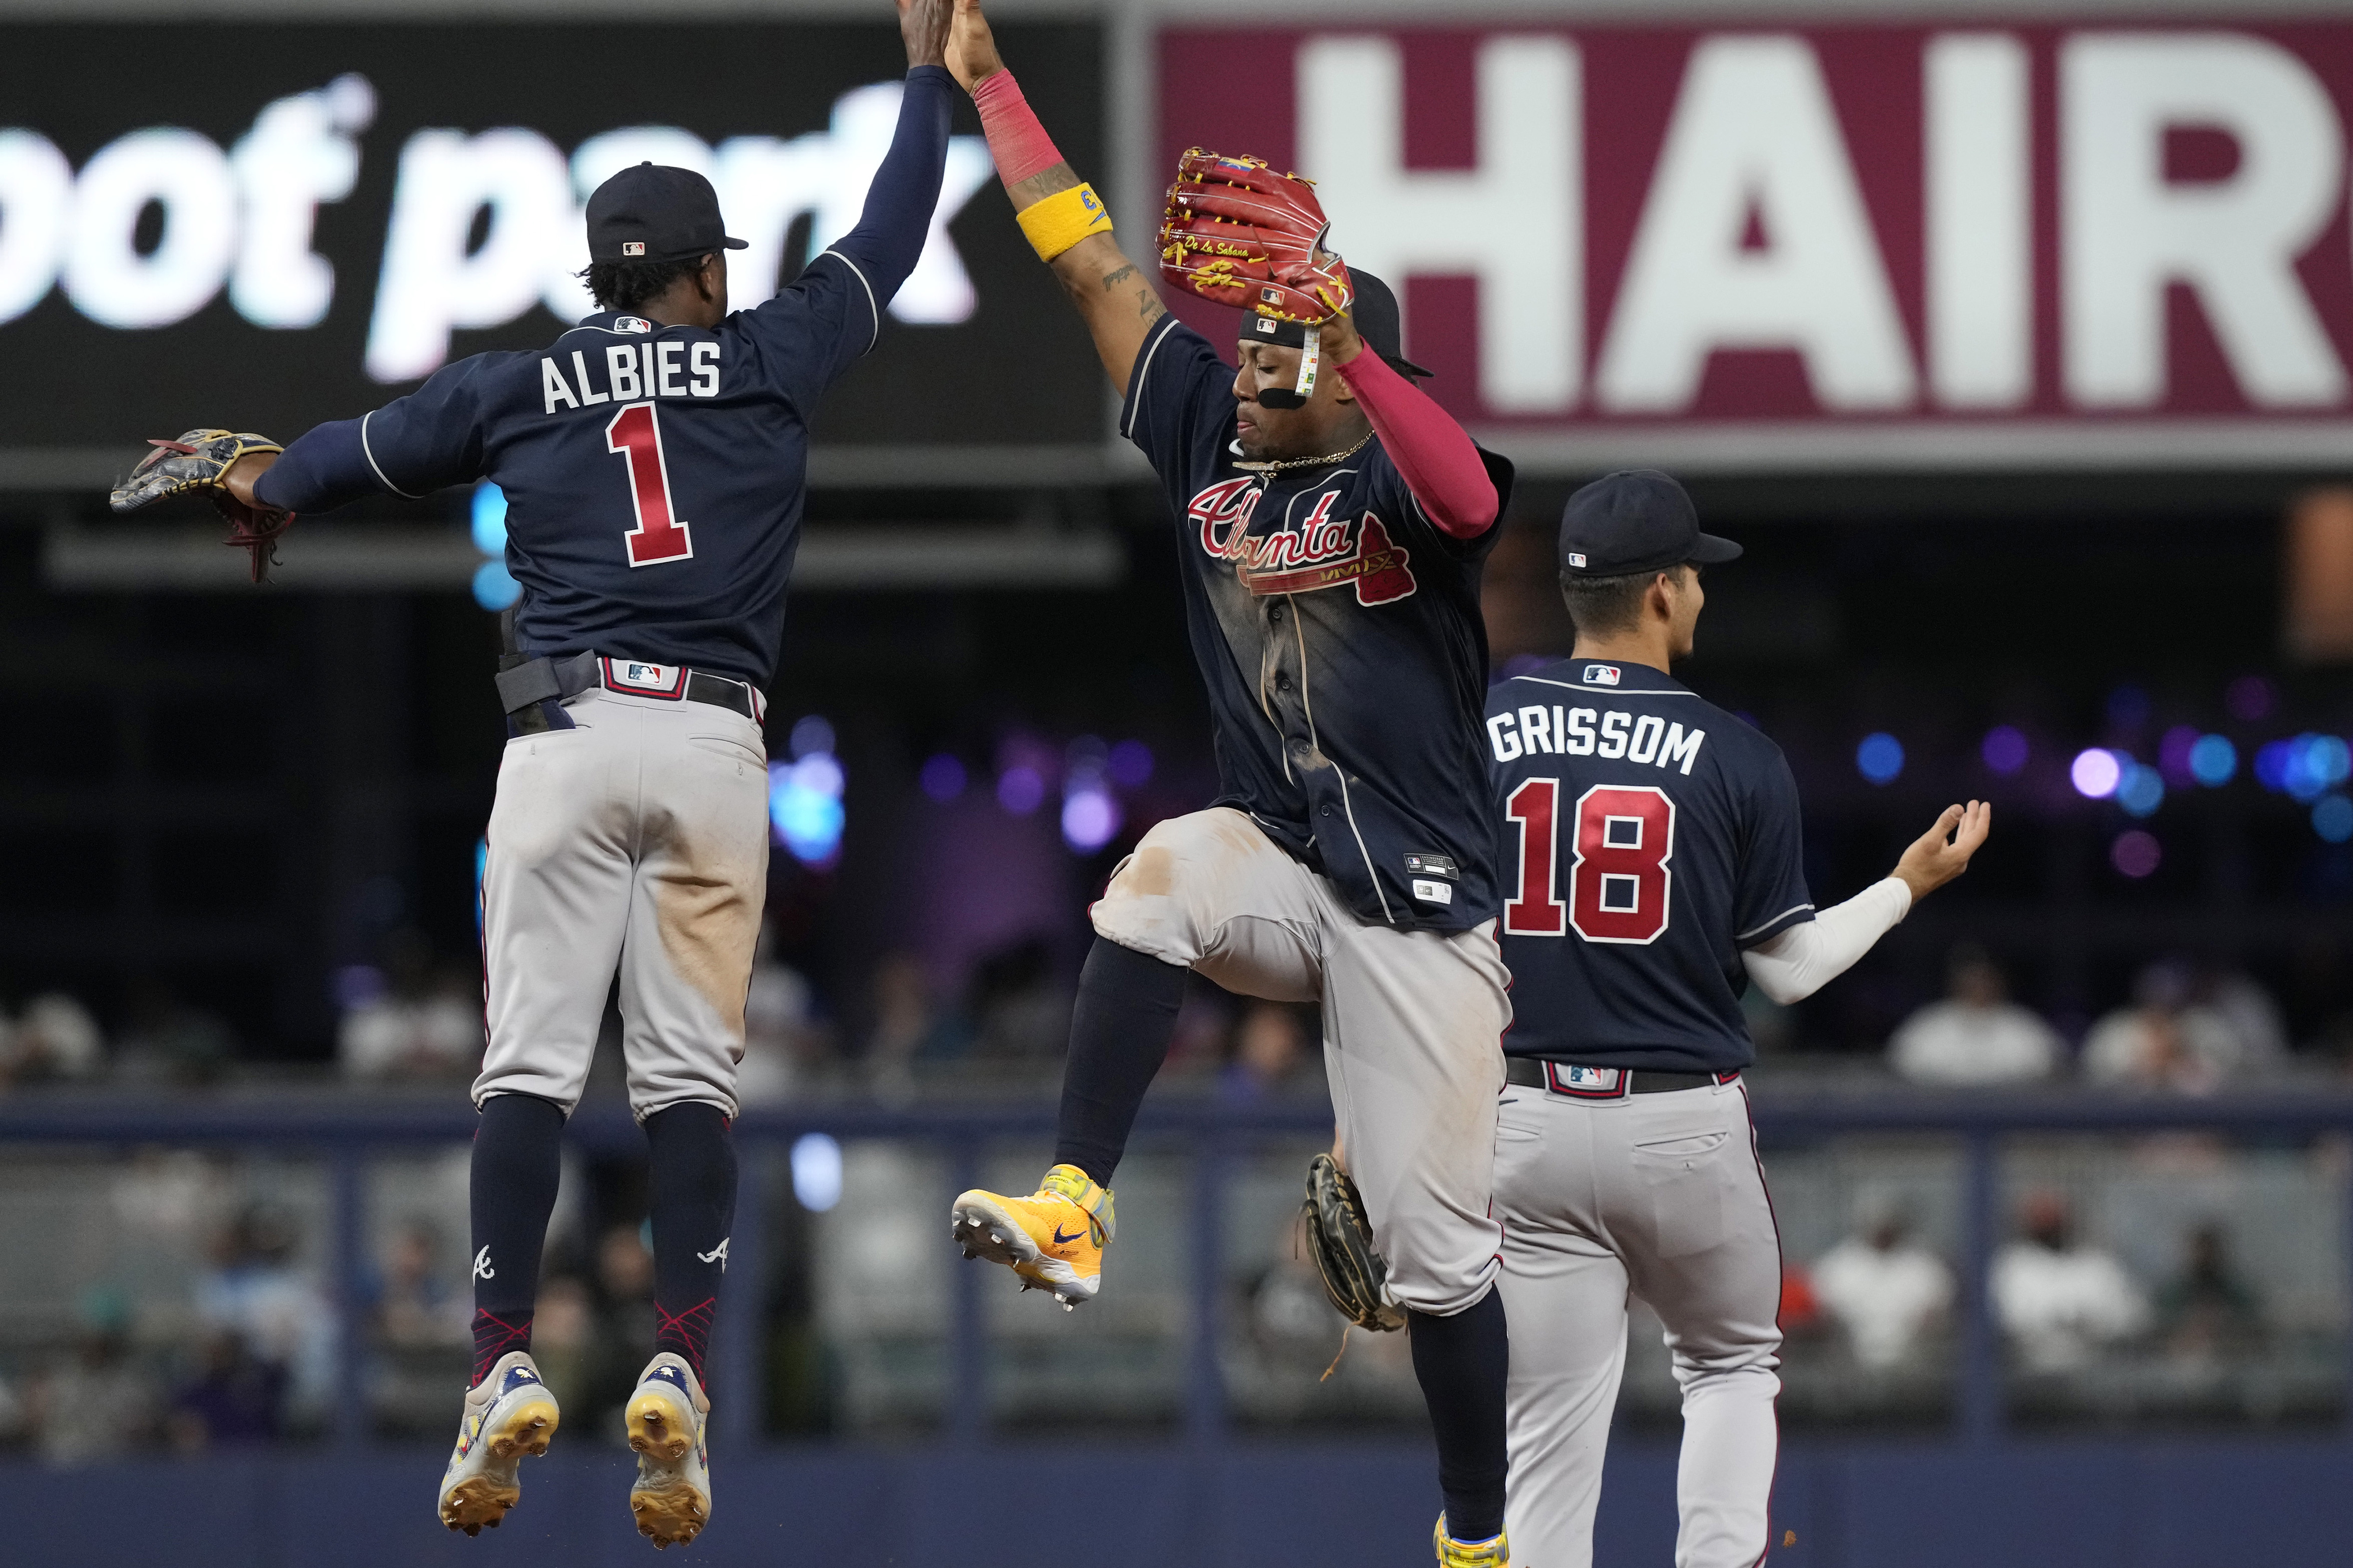 Braves move Ozzie Albies down in Game 6 lineup after recent struggles